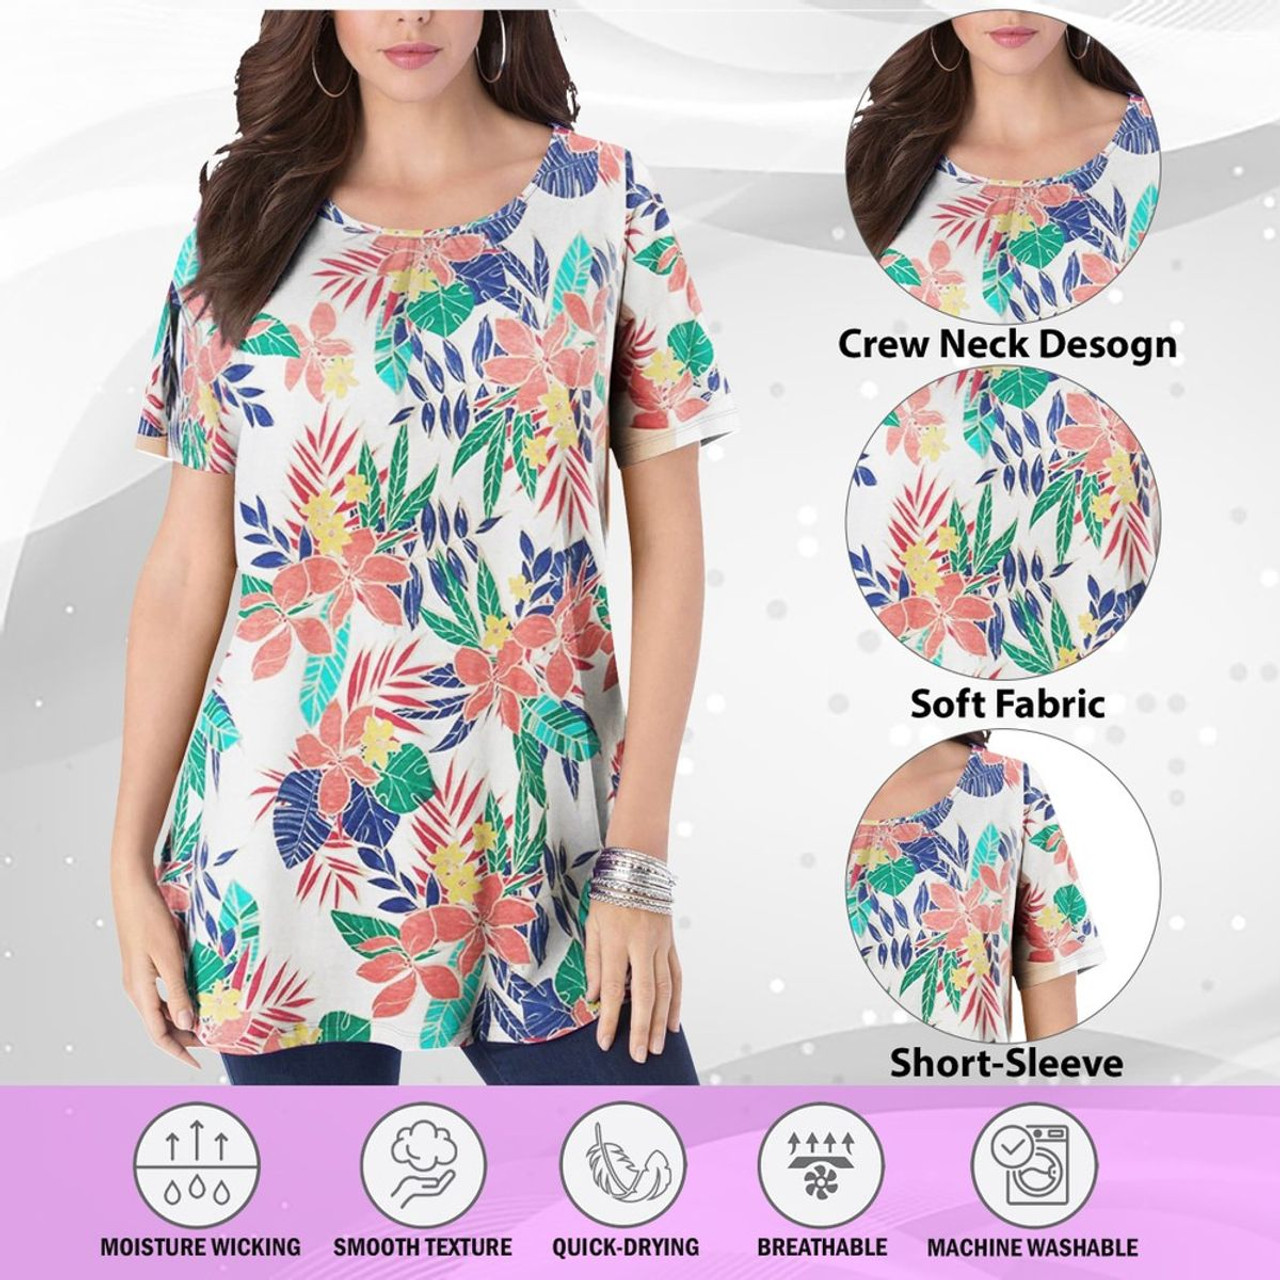 Women’s Printed Short Sleeve Casual Crew Neck T-Shirts (4-Pack) product image